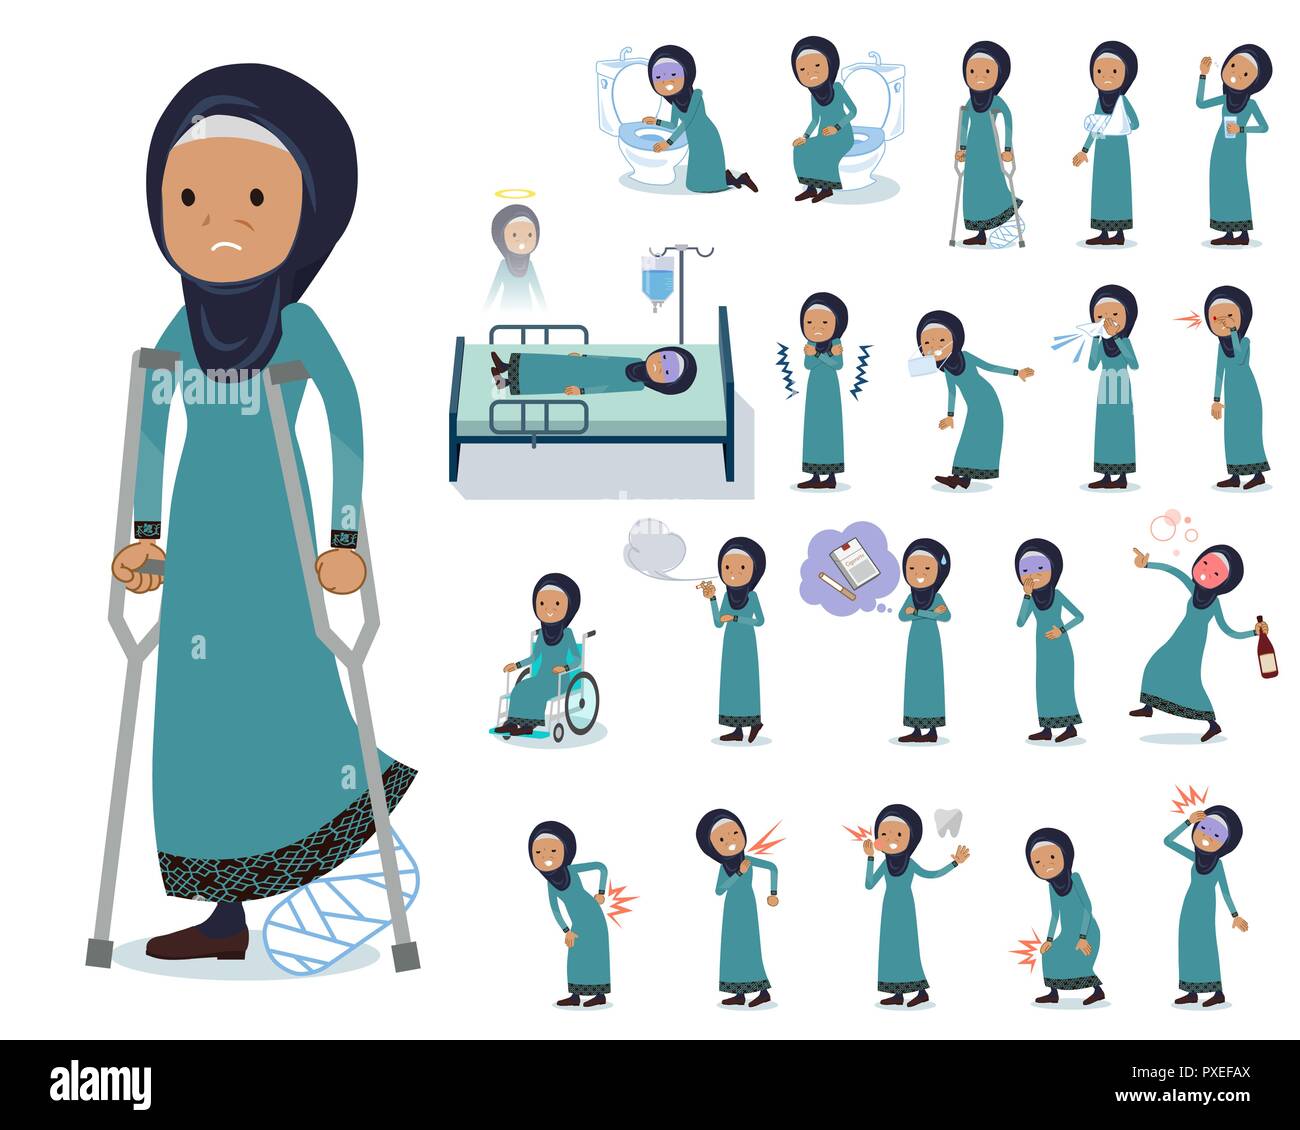 A set of old women wearing hijab with injury and illness.There are actions that express dependence and death.It's vector art so it's easy to edit. Stock Vector